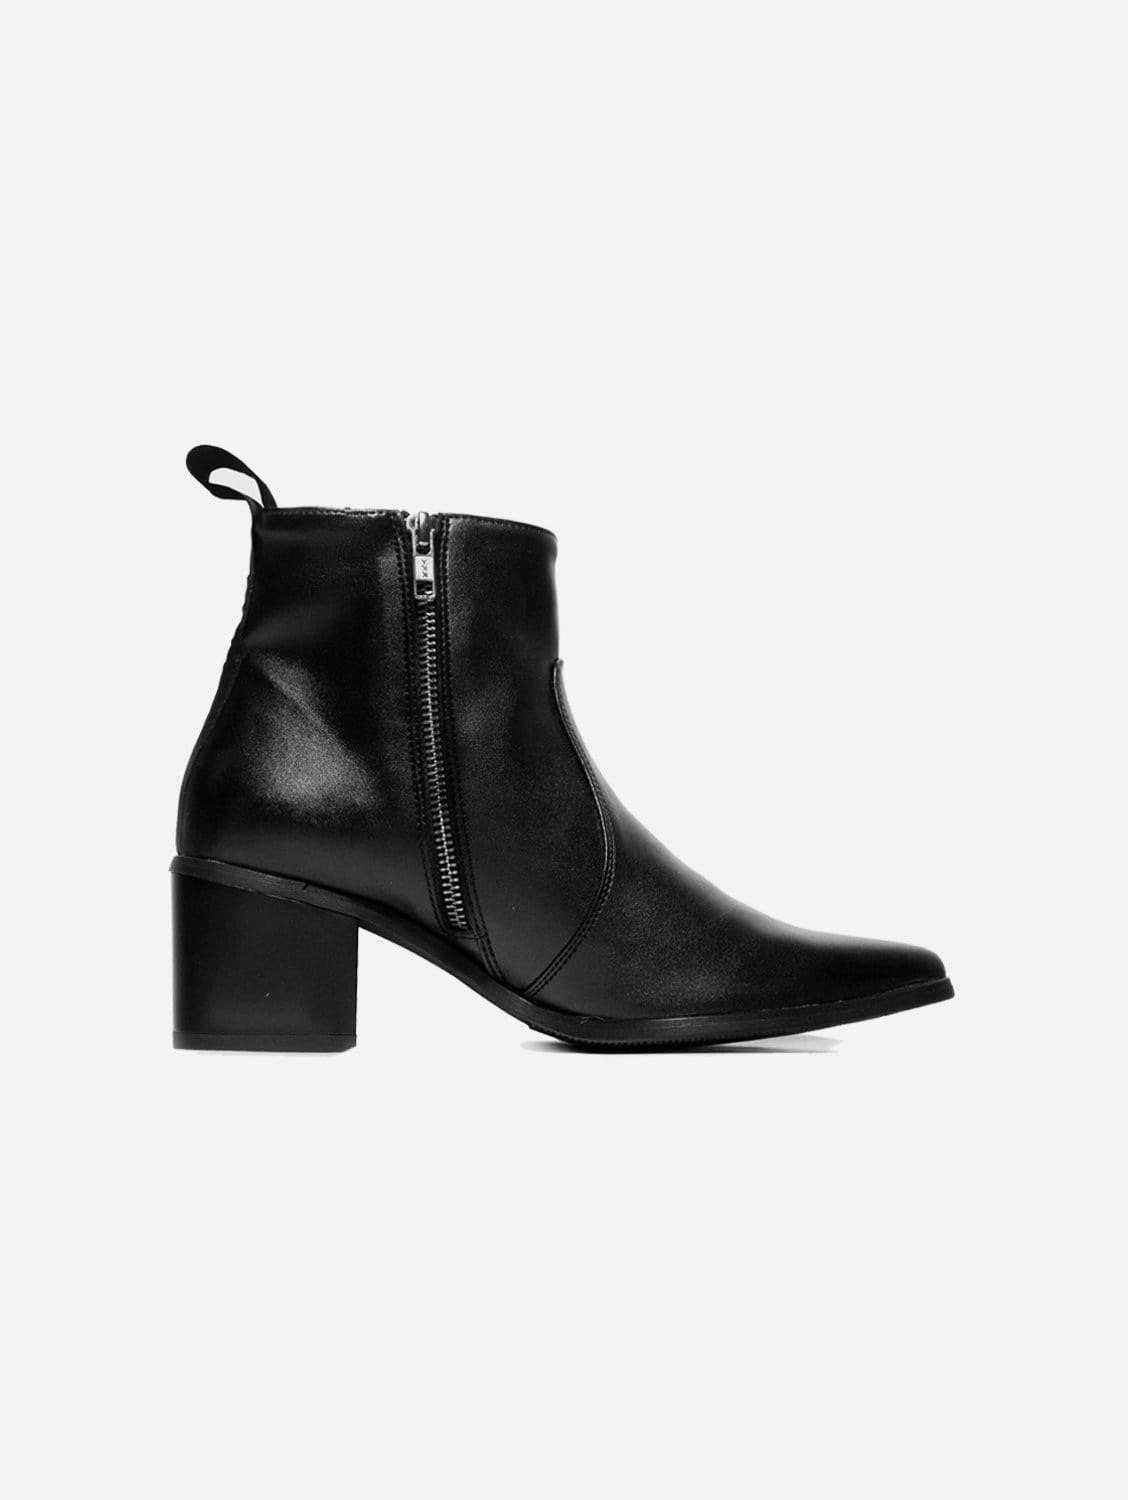 Leather Ankle Booties | No Heel Shoes | Shop Online